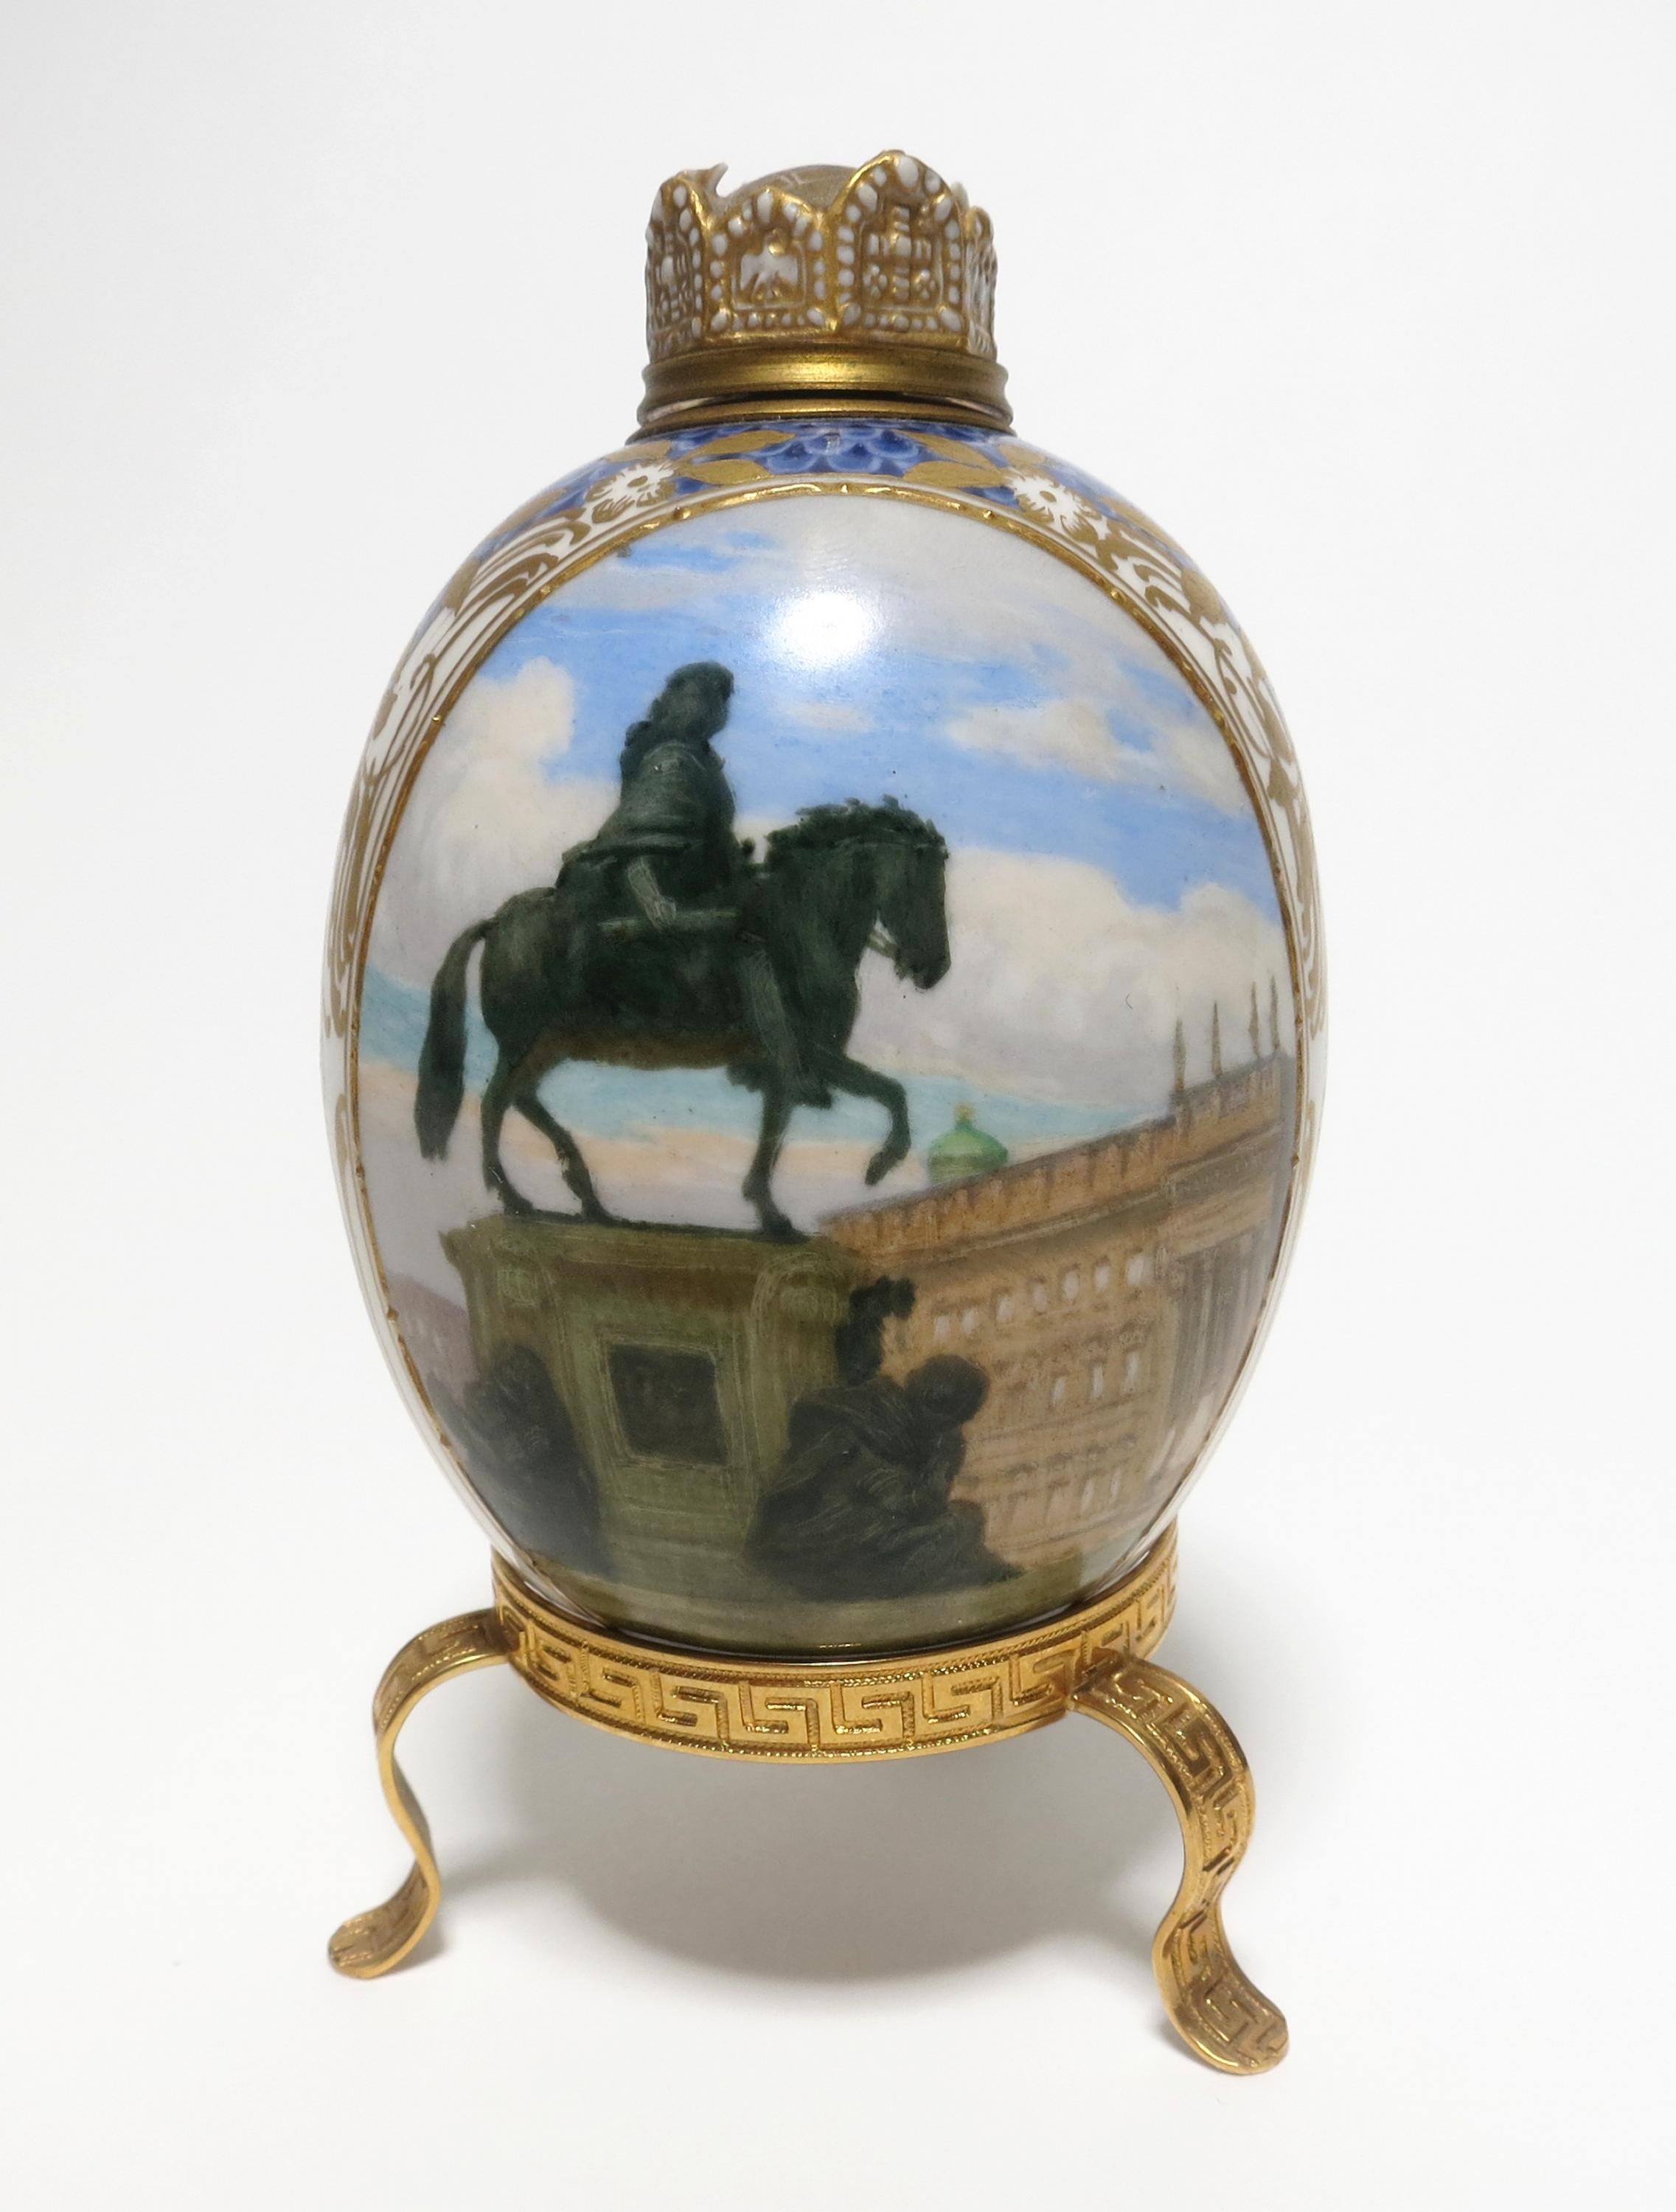 PORCELAIN EASTER EGG FLACON WITH VIEW OF BERLIN. KPM. Berlin. Date: 19th century. Technique: